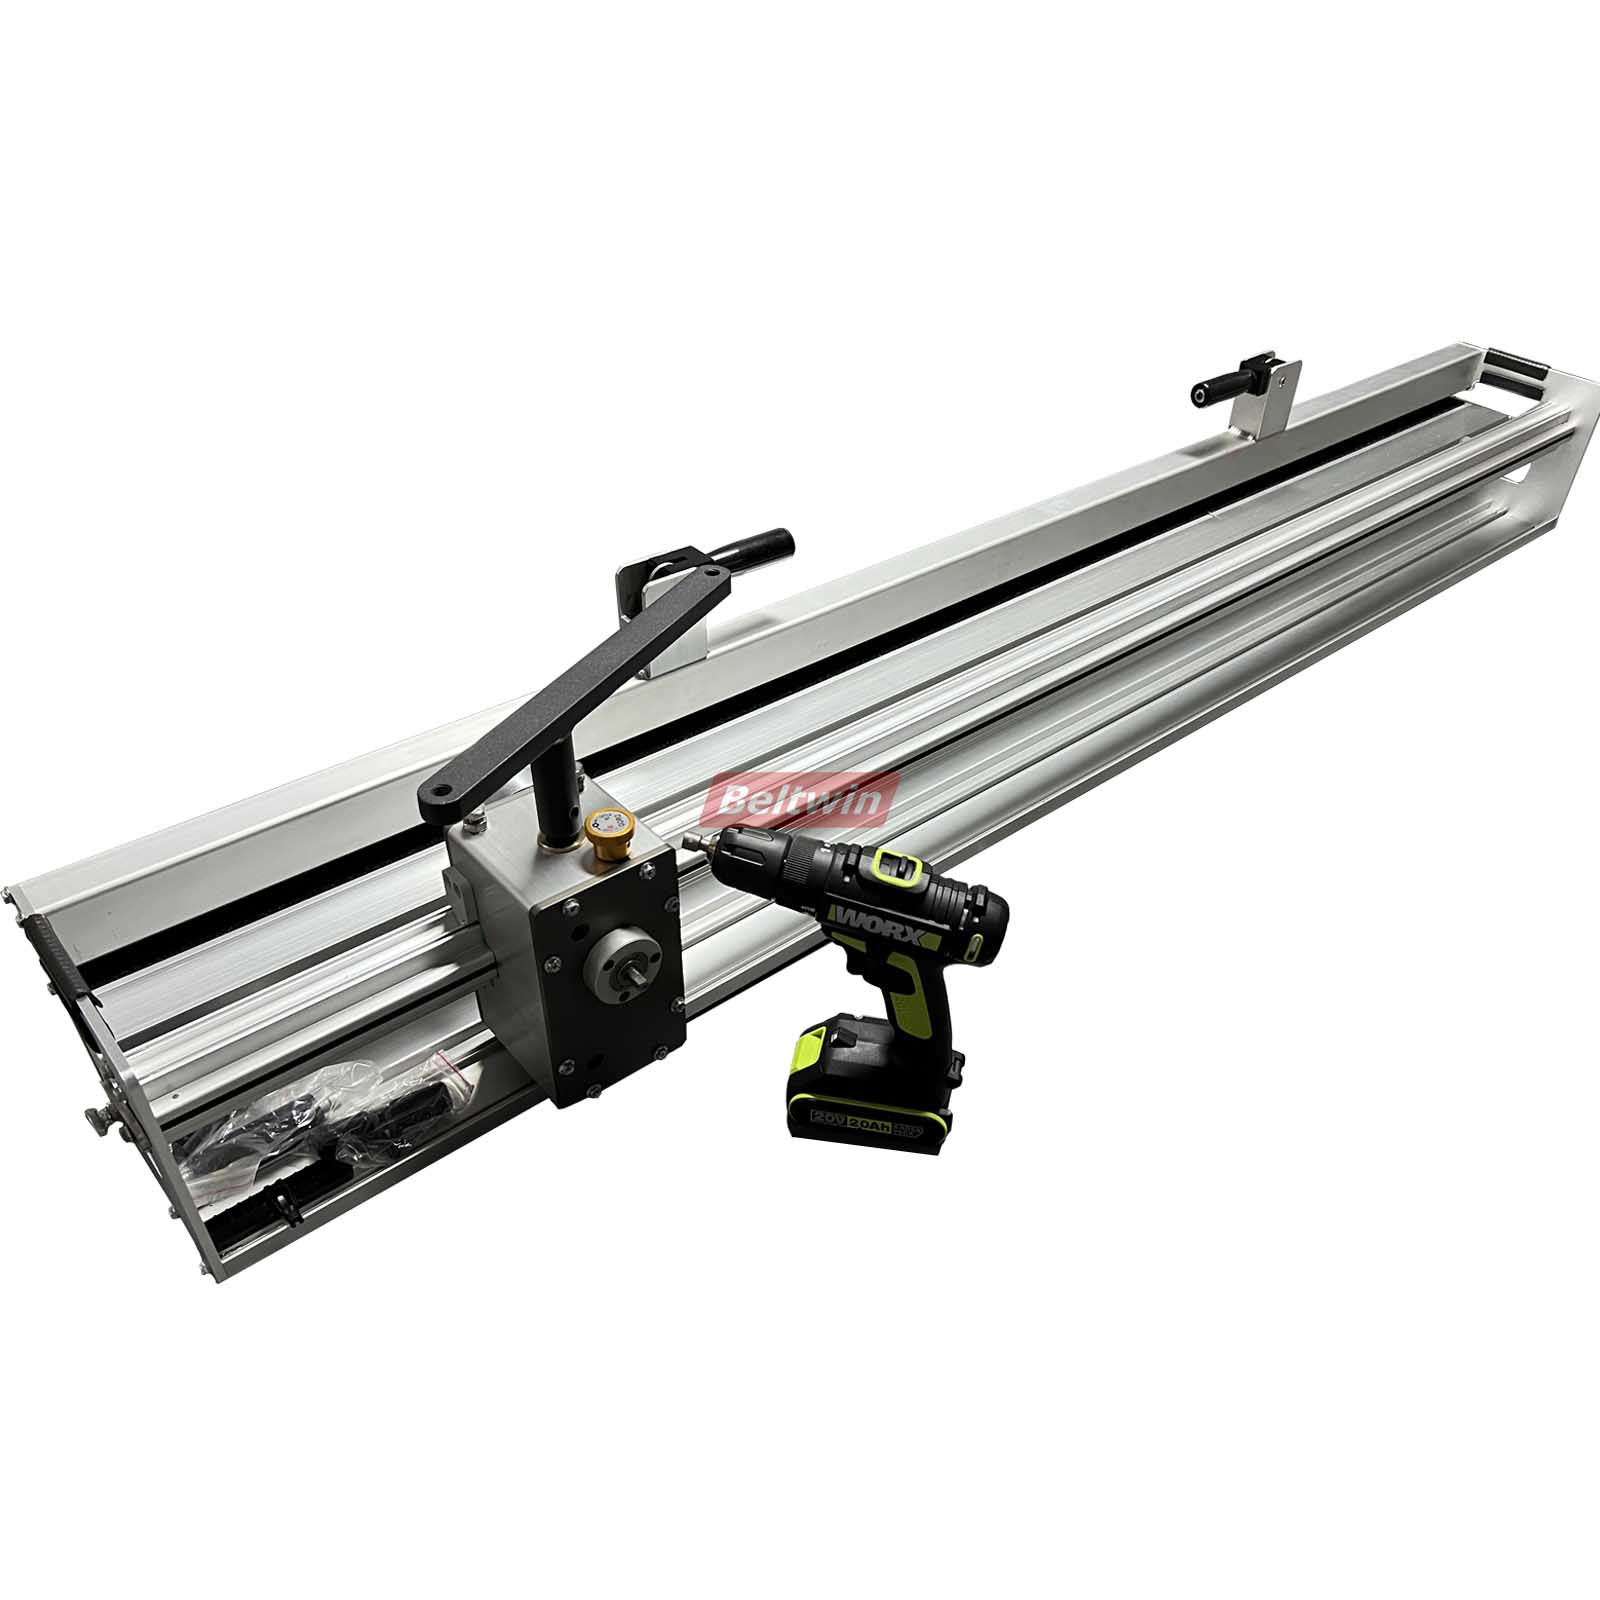 Roller Lacer with electric drill KA600-1500 for Conveyor Belt Mechanical Splice